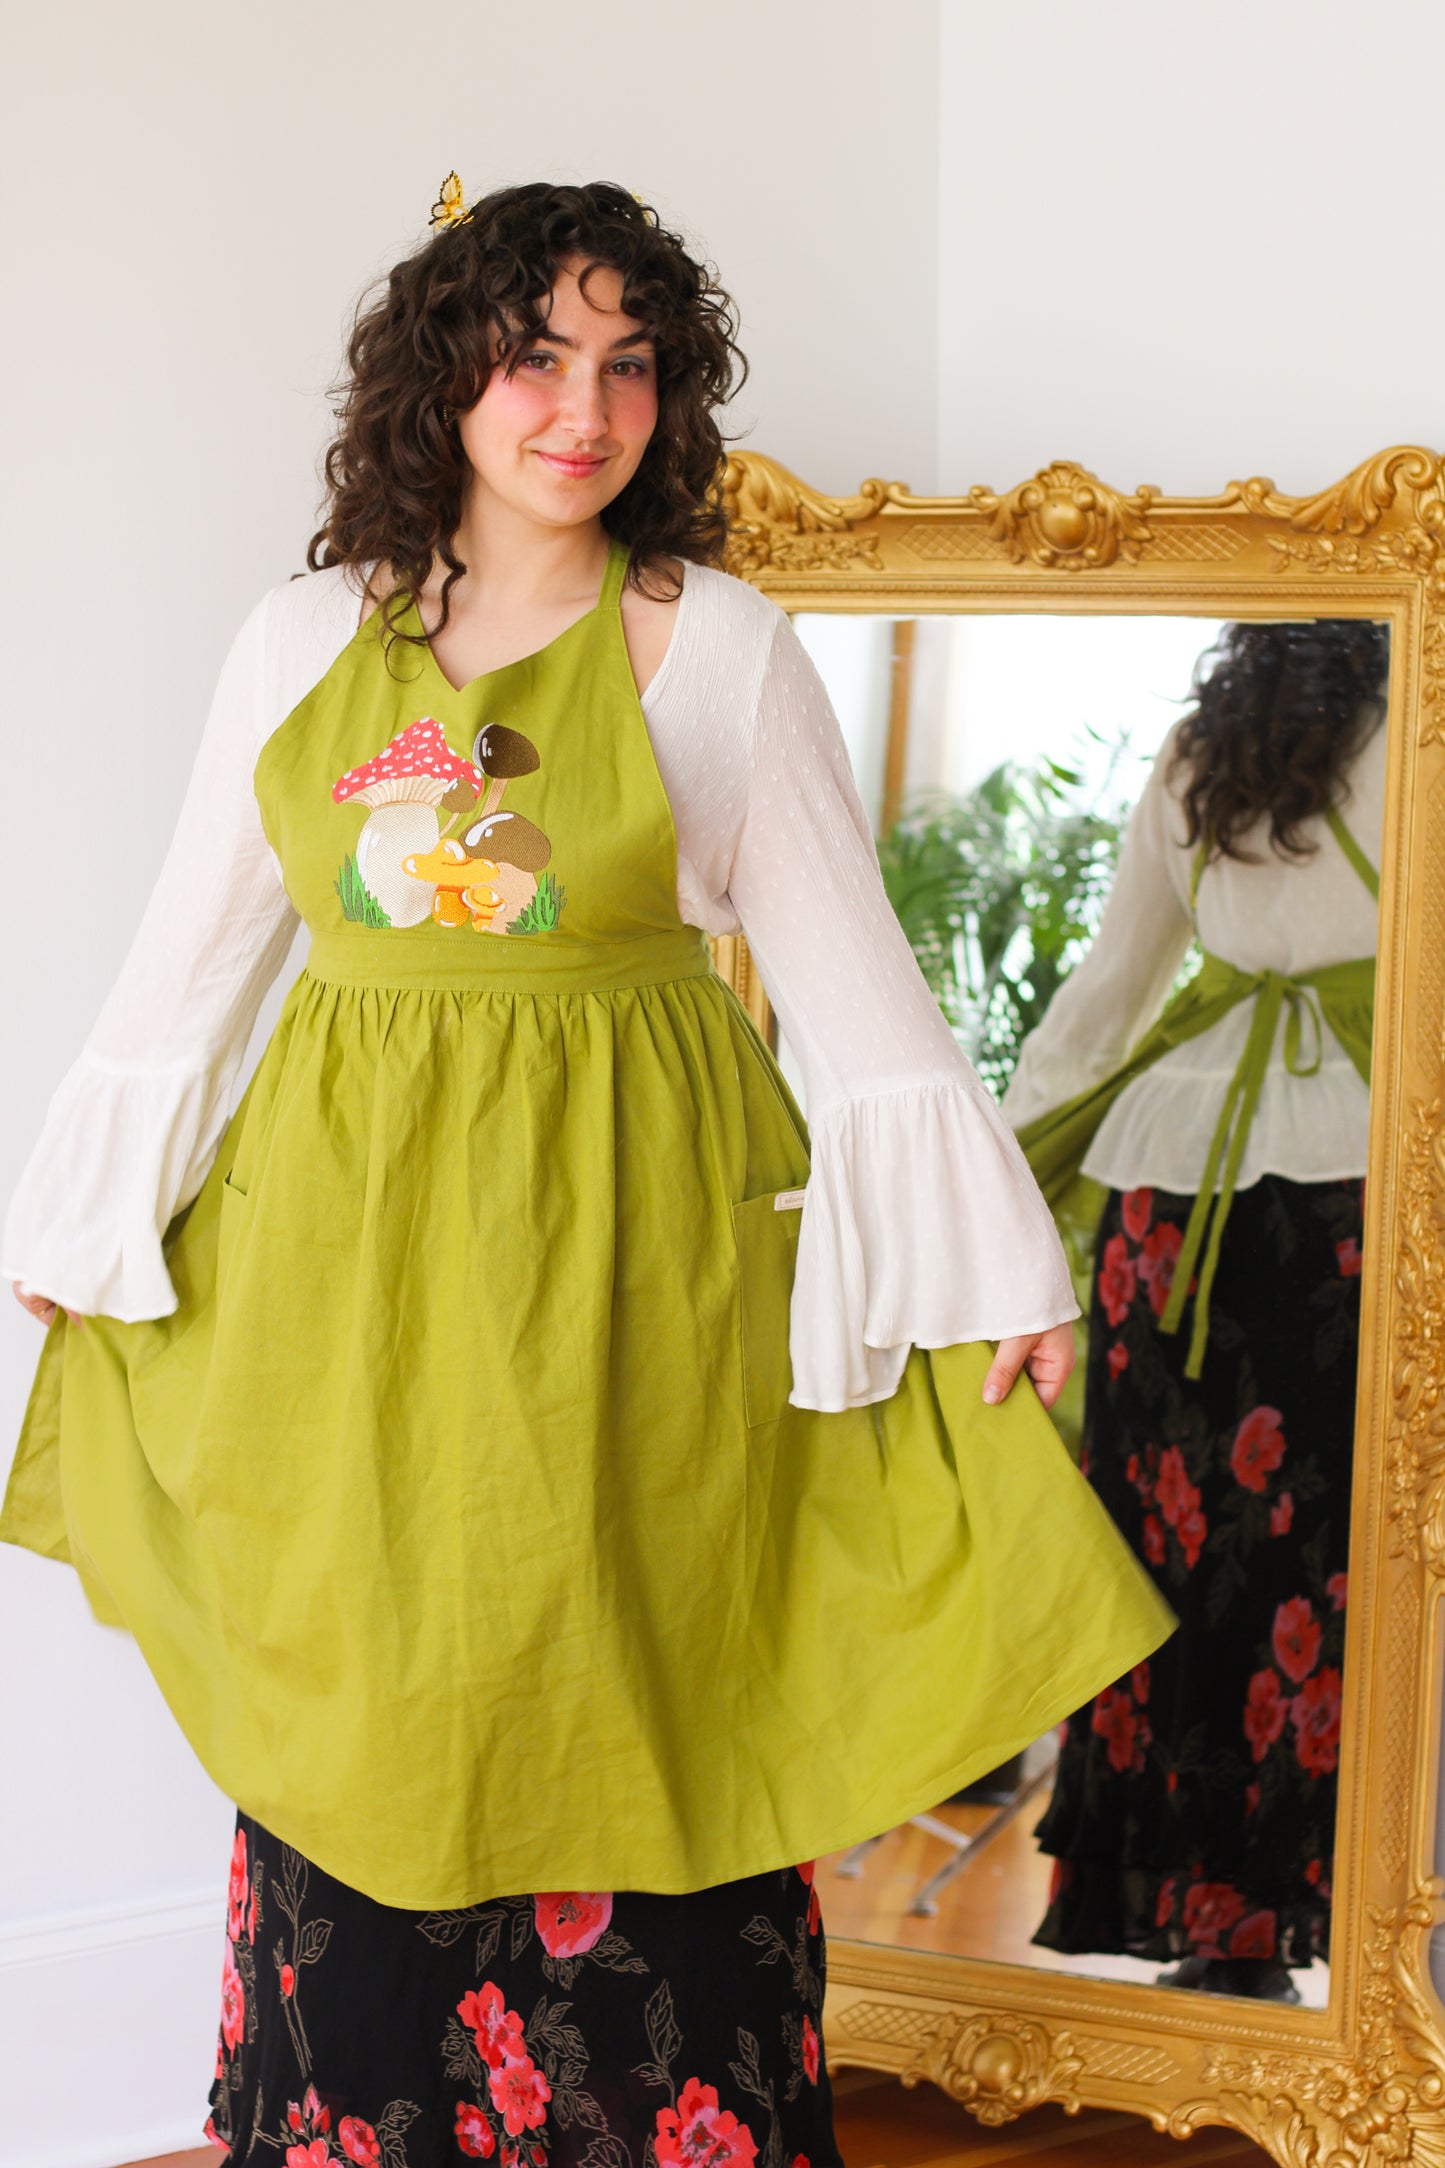 Linen Embroidered Pinafore Aprons!